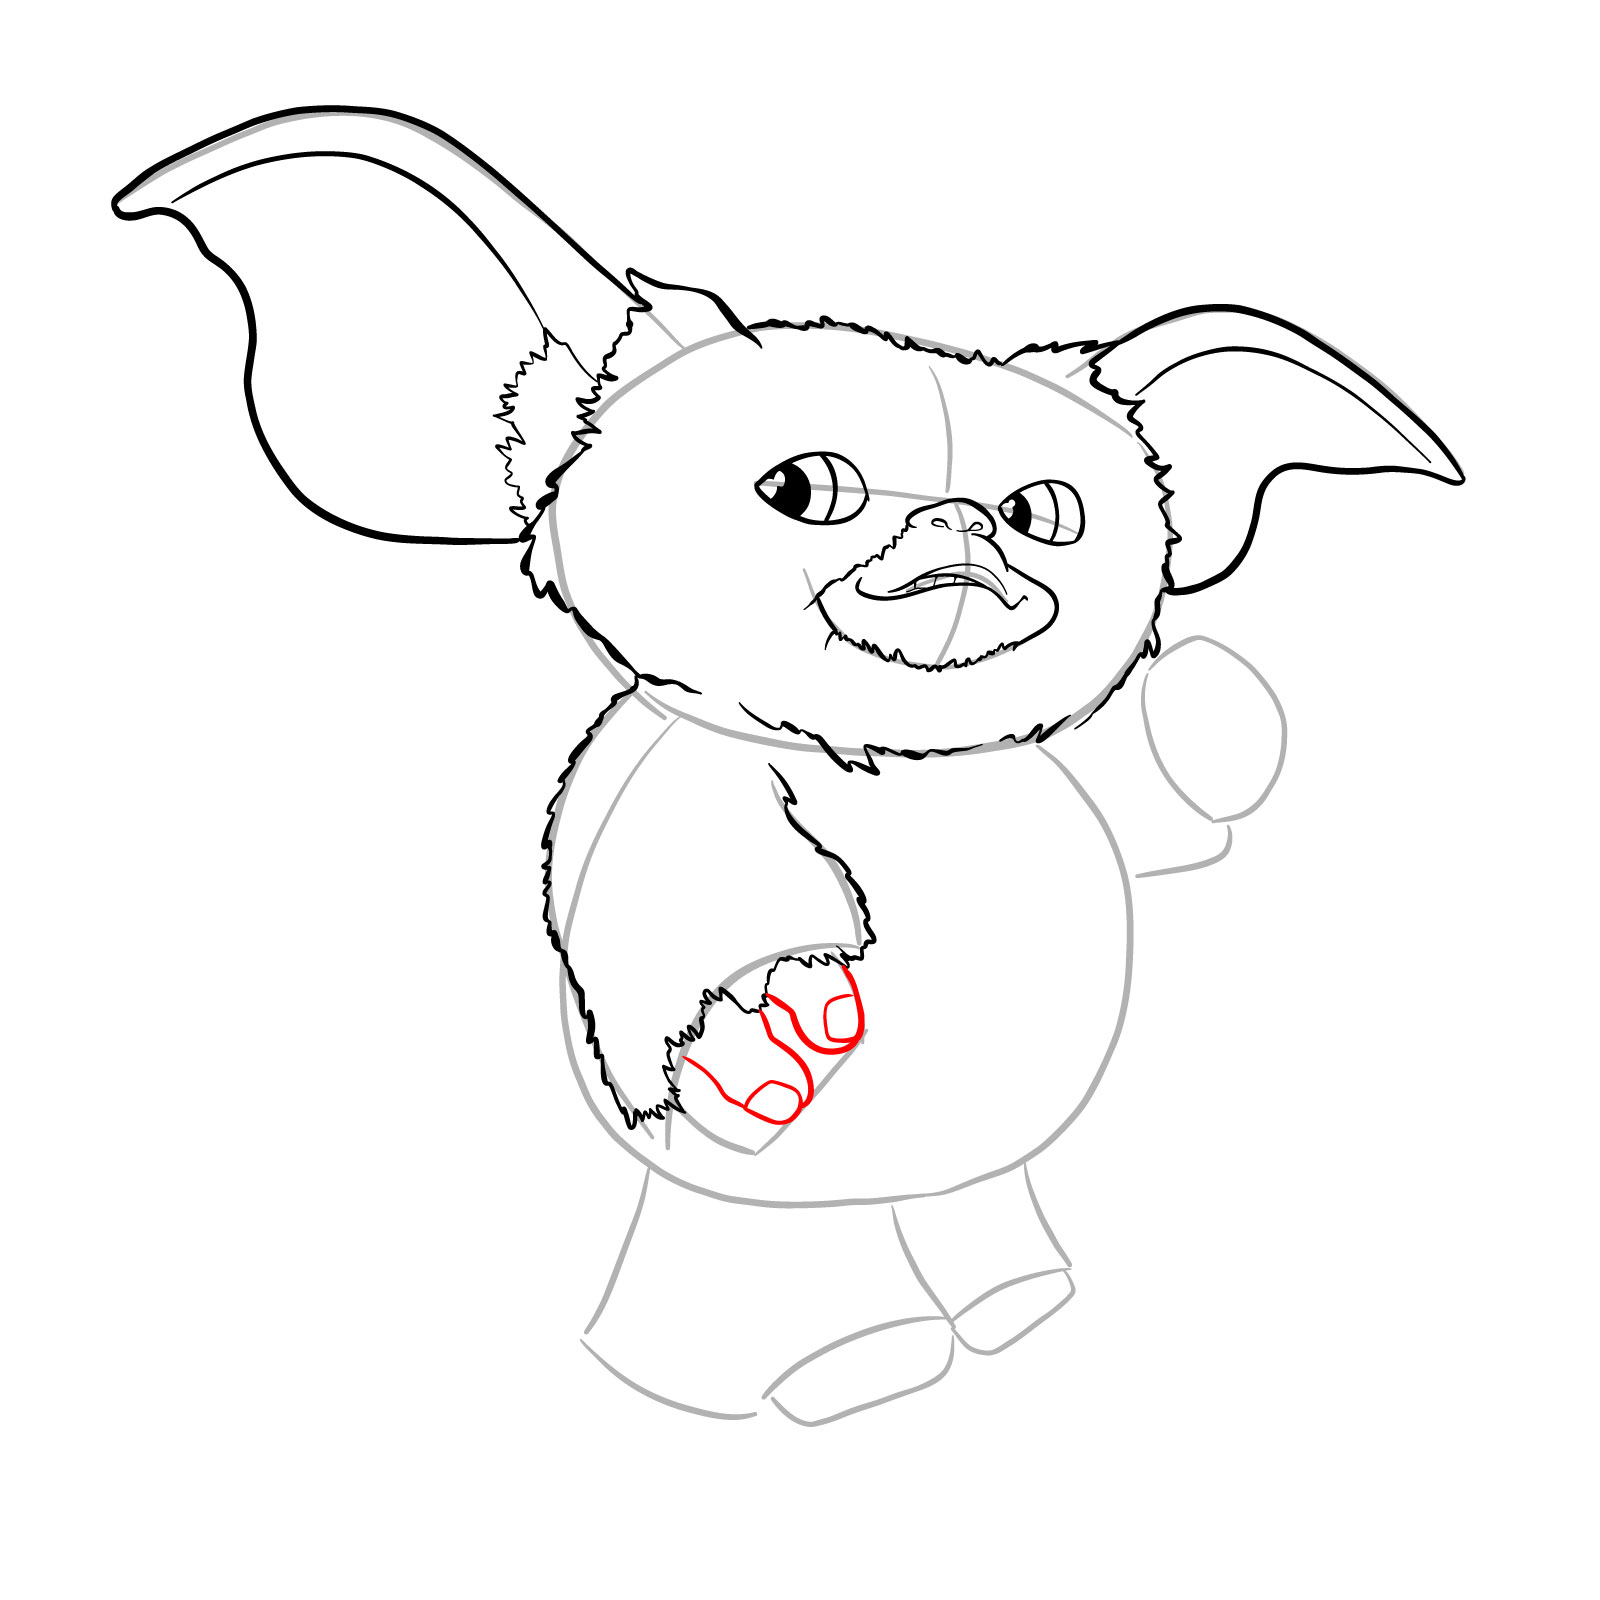 How to draw a Gremlin - step 18